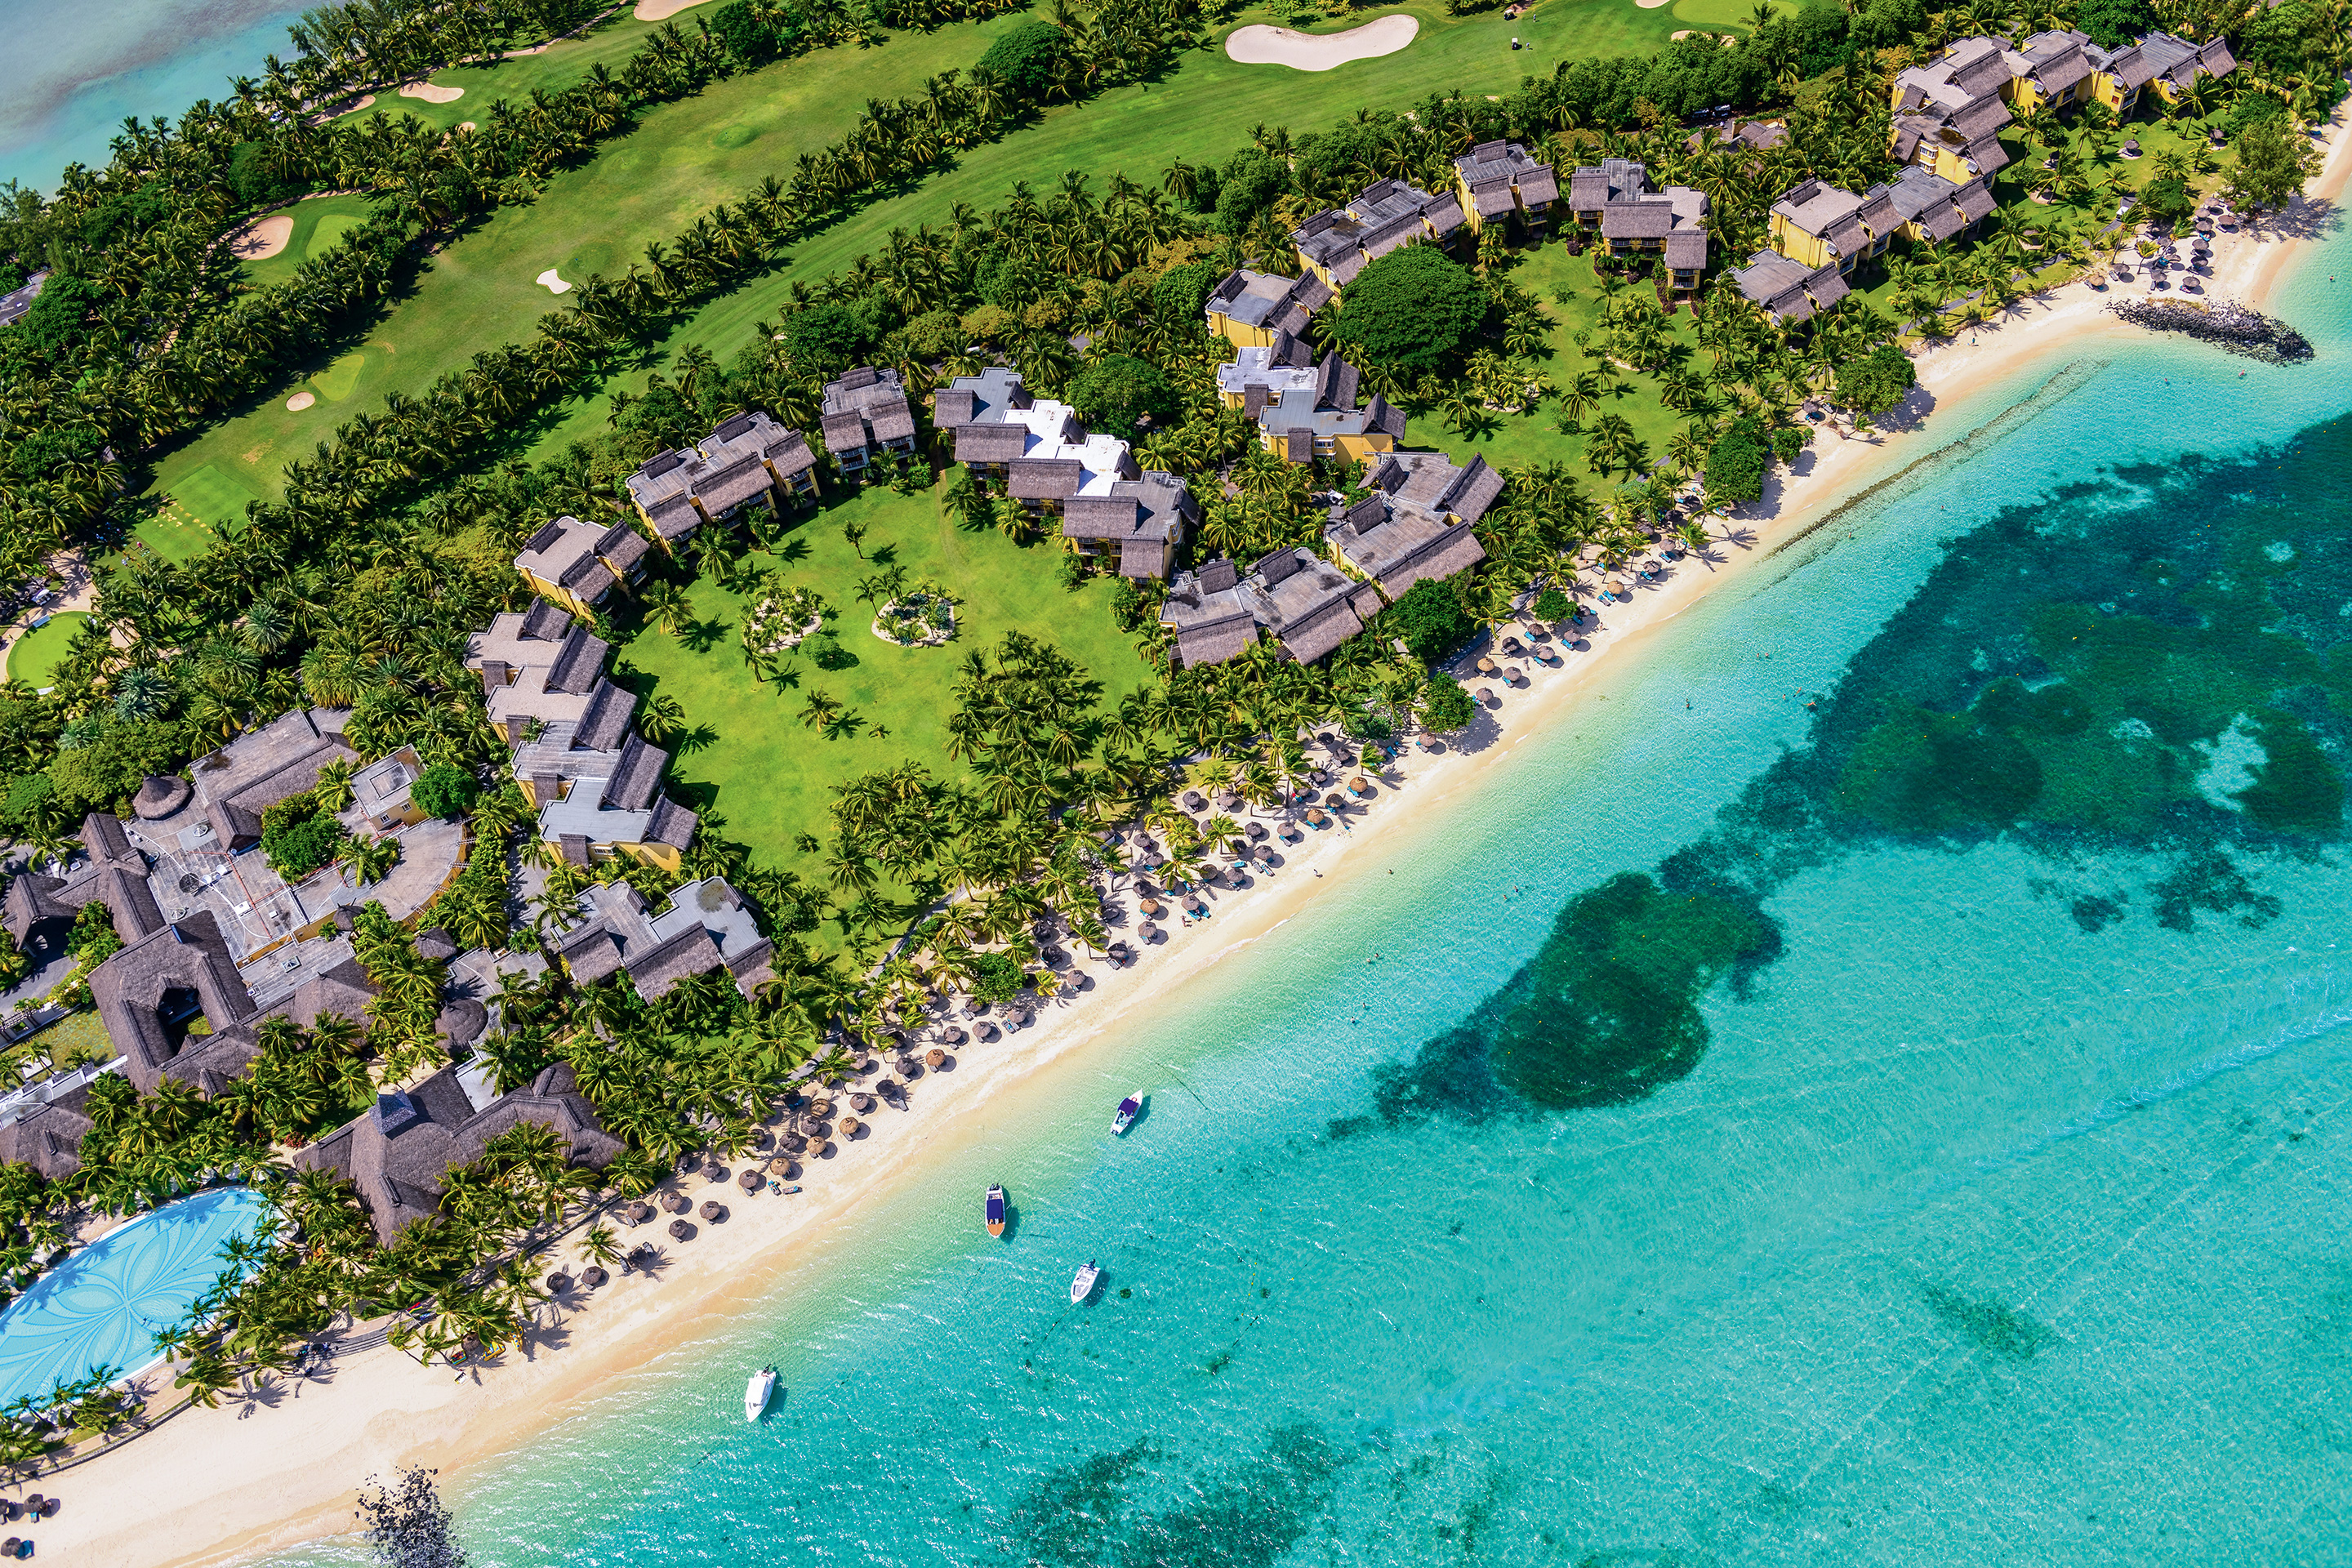 The Best Hotel in Mauritius?